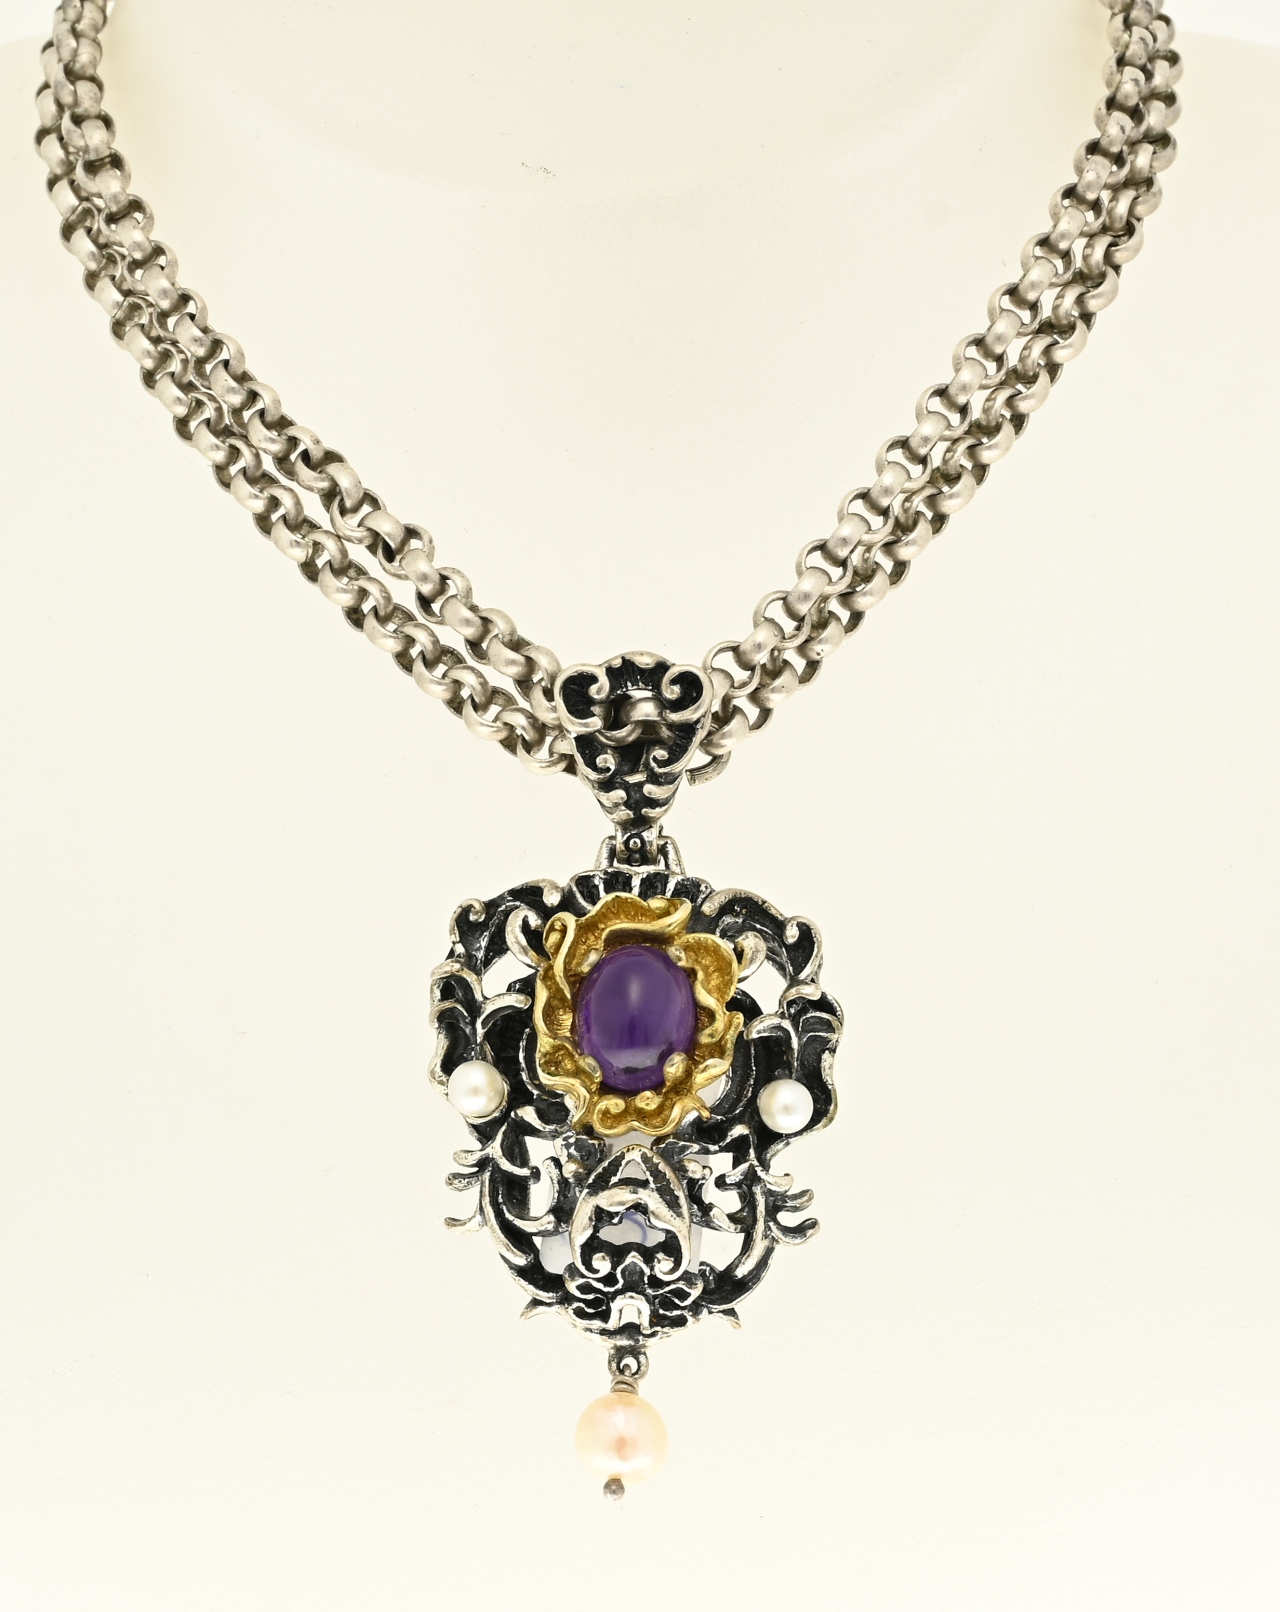 Silver jasseron necklace with amethyst pendant